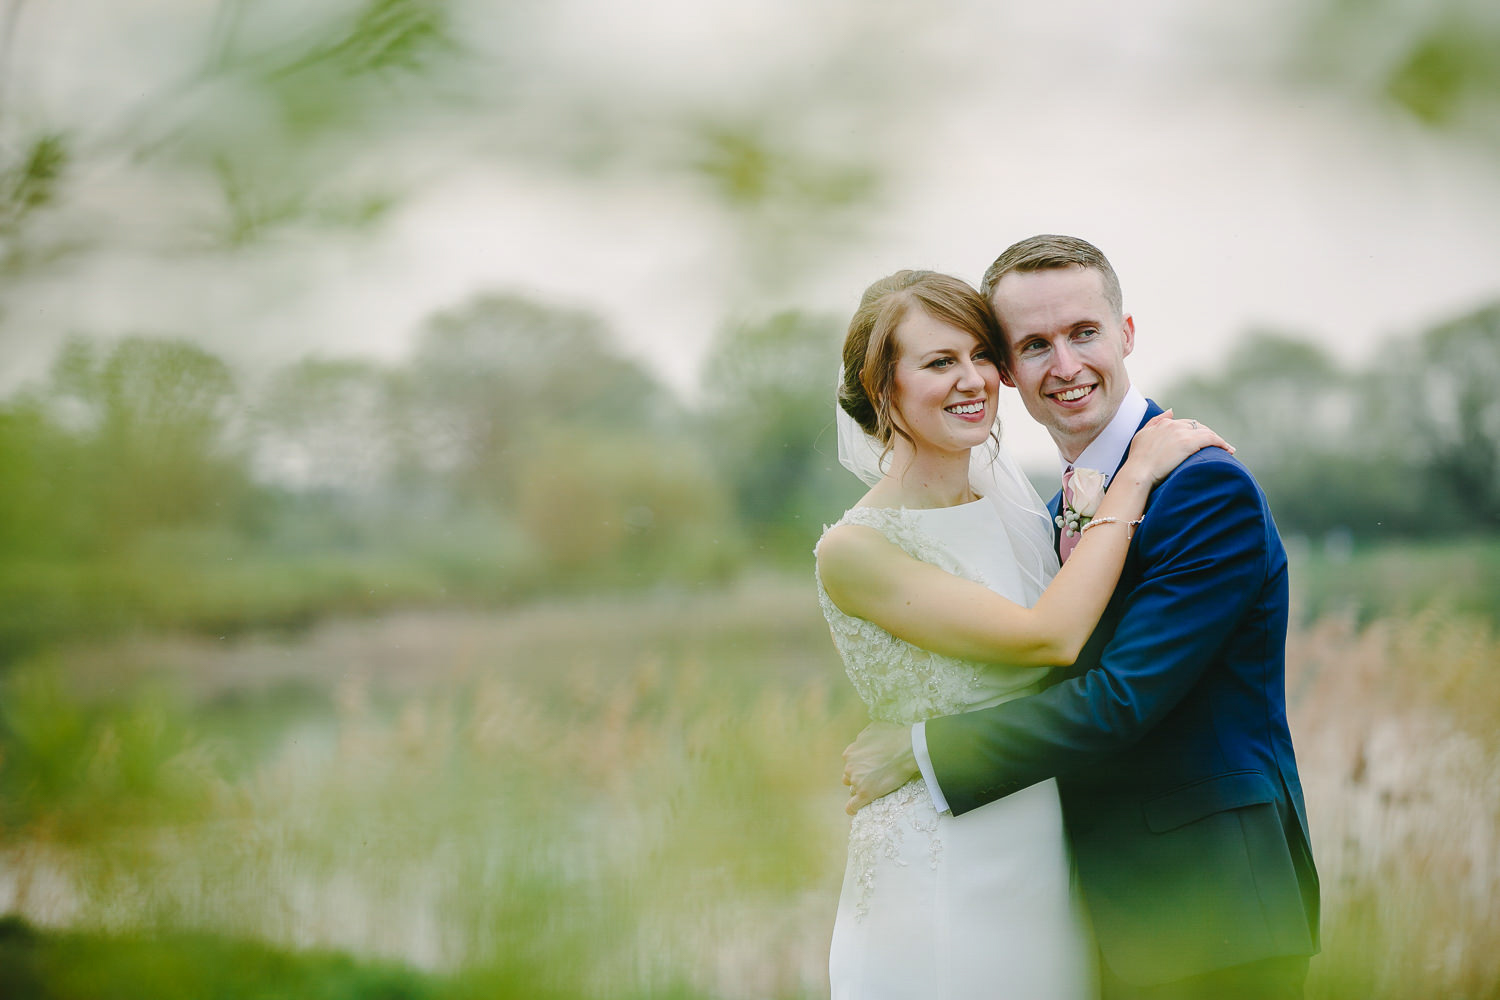 Bride and groom portrait outdoors by a lake